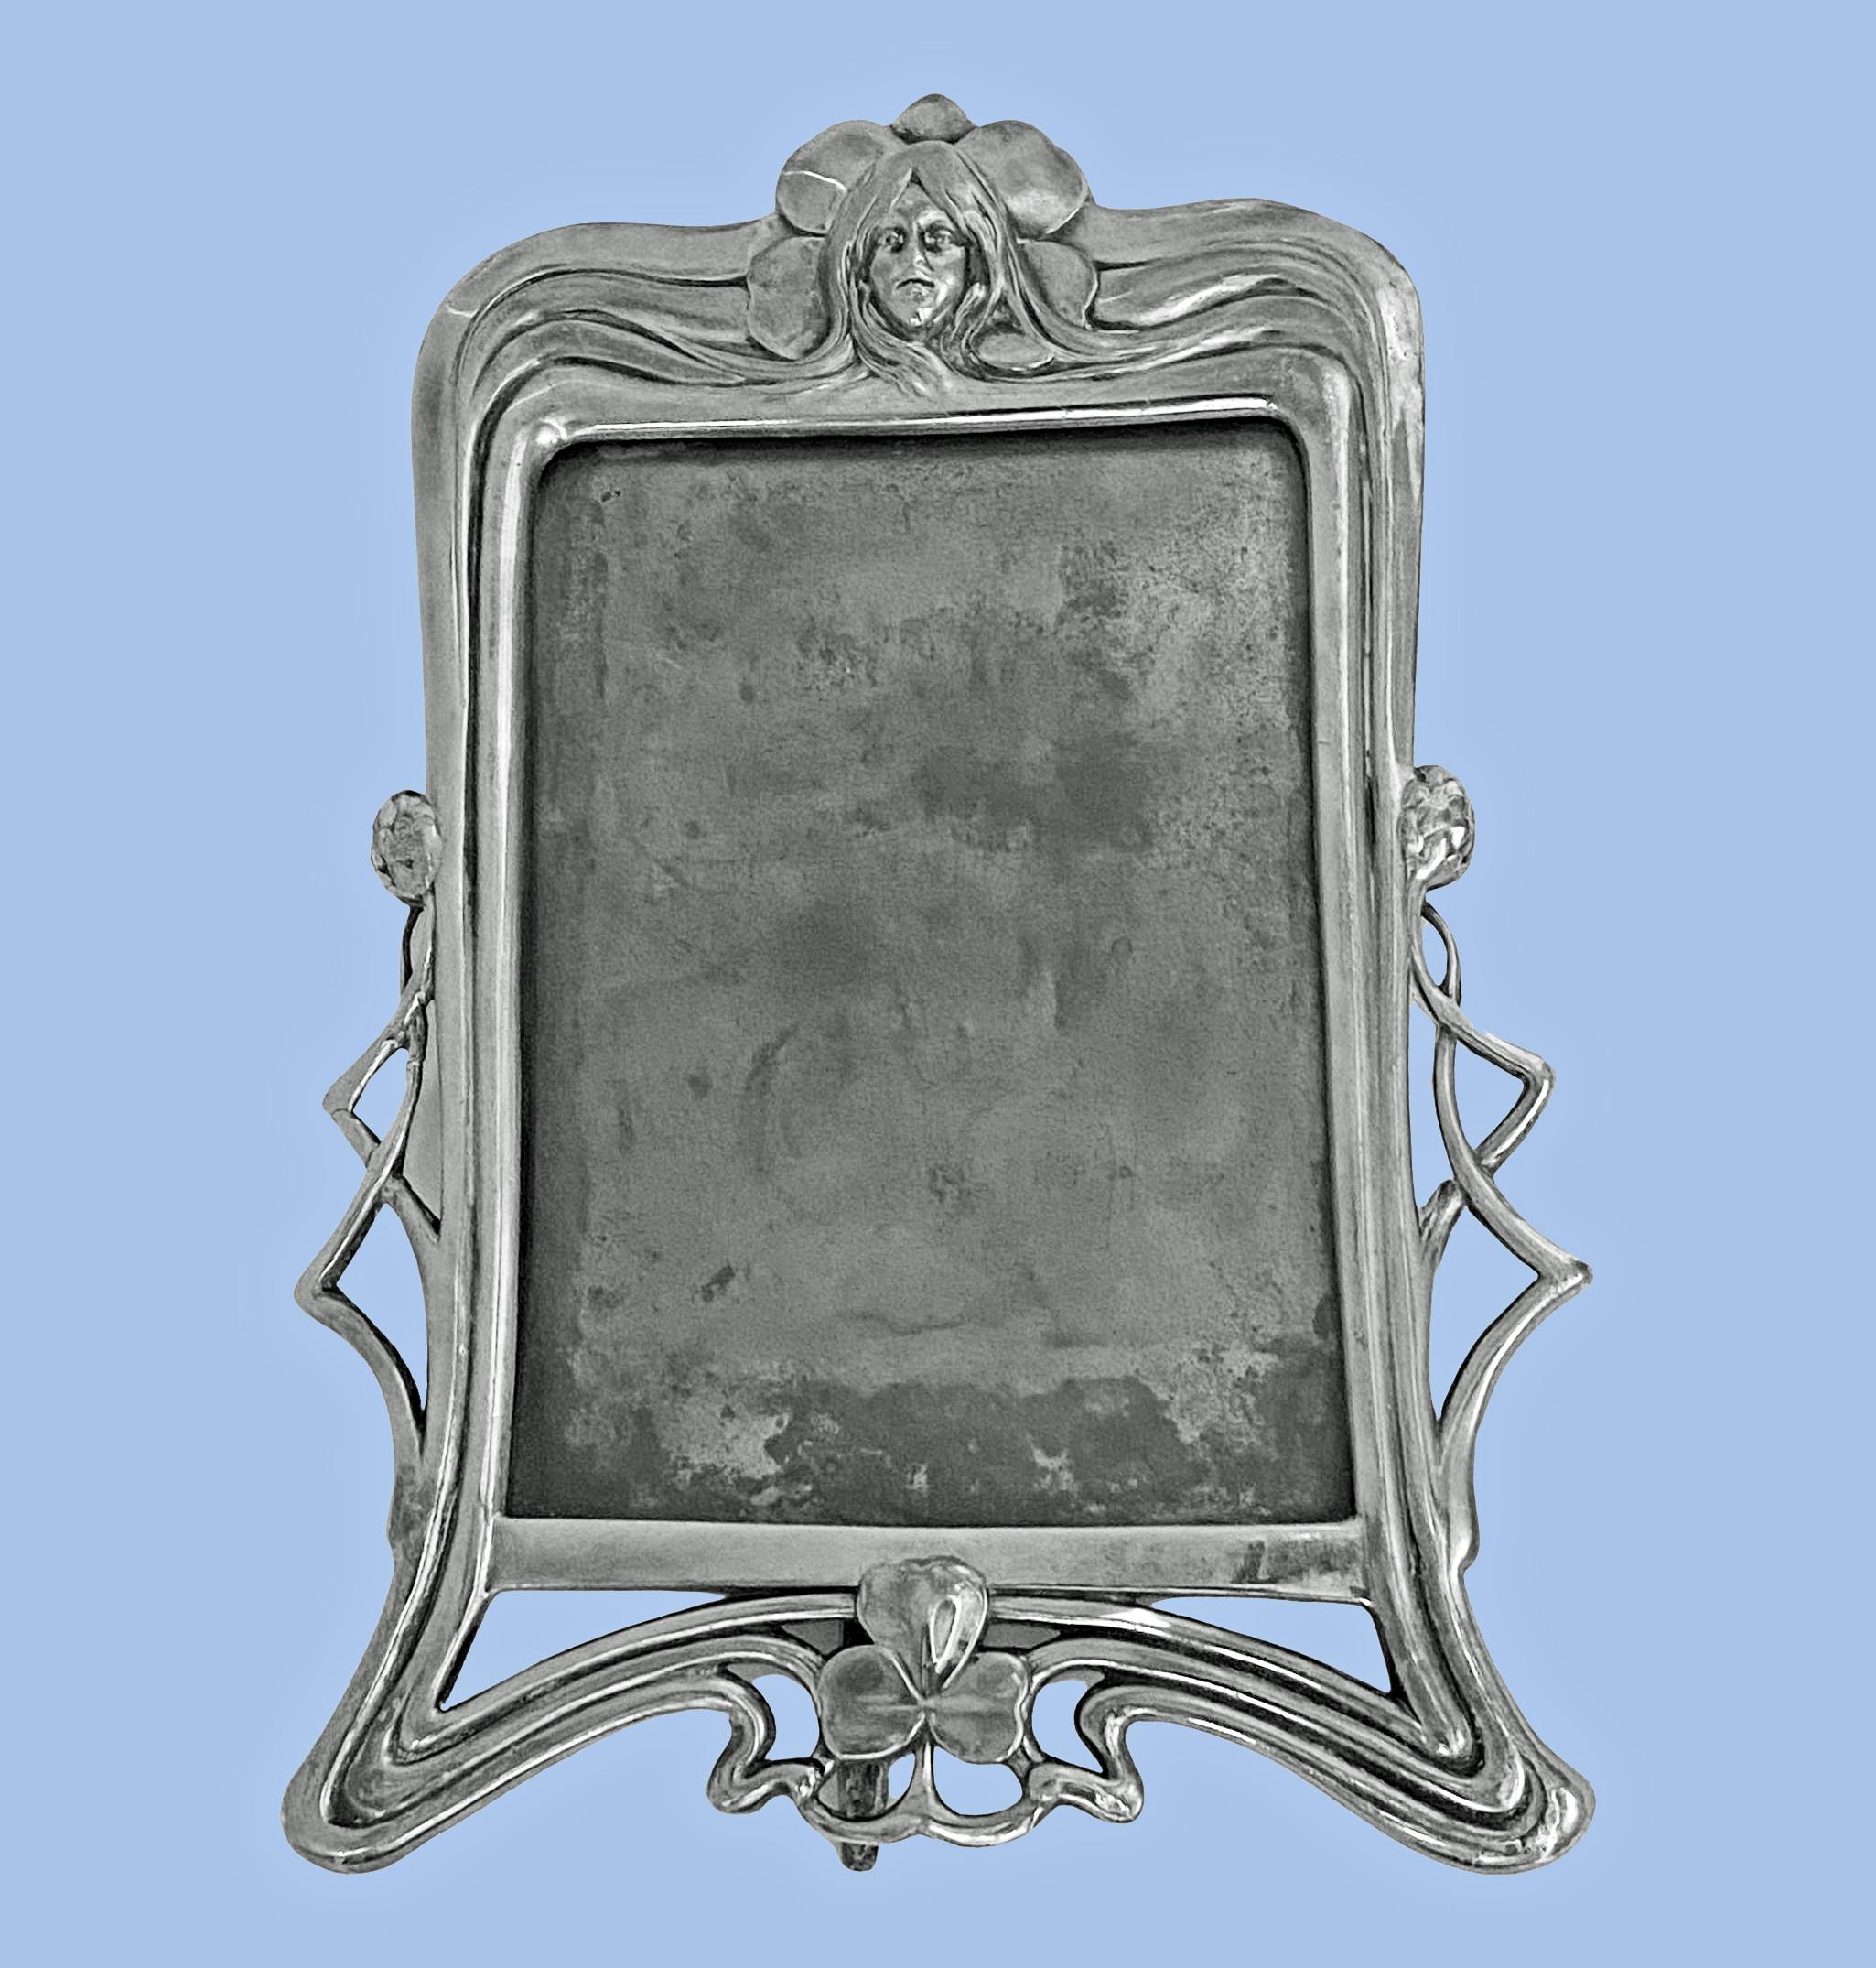 WMF Art Nouveau Jugendstil Britannia metal Photograph Frame, Germany C.1900, WMF. Ref No 90 page 304 WMF 1906 catalogue. WMF marks B 1/0 beehive B and export mark. Overall measurements: 8 3/4 x 5 3/4